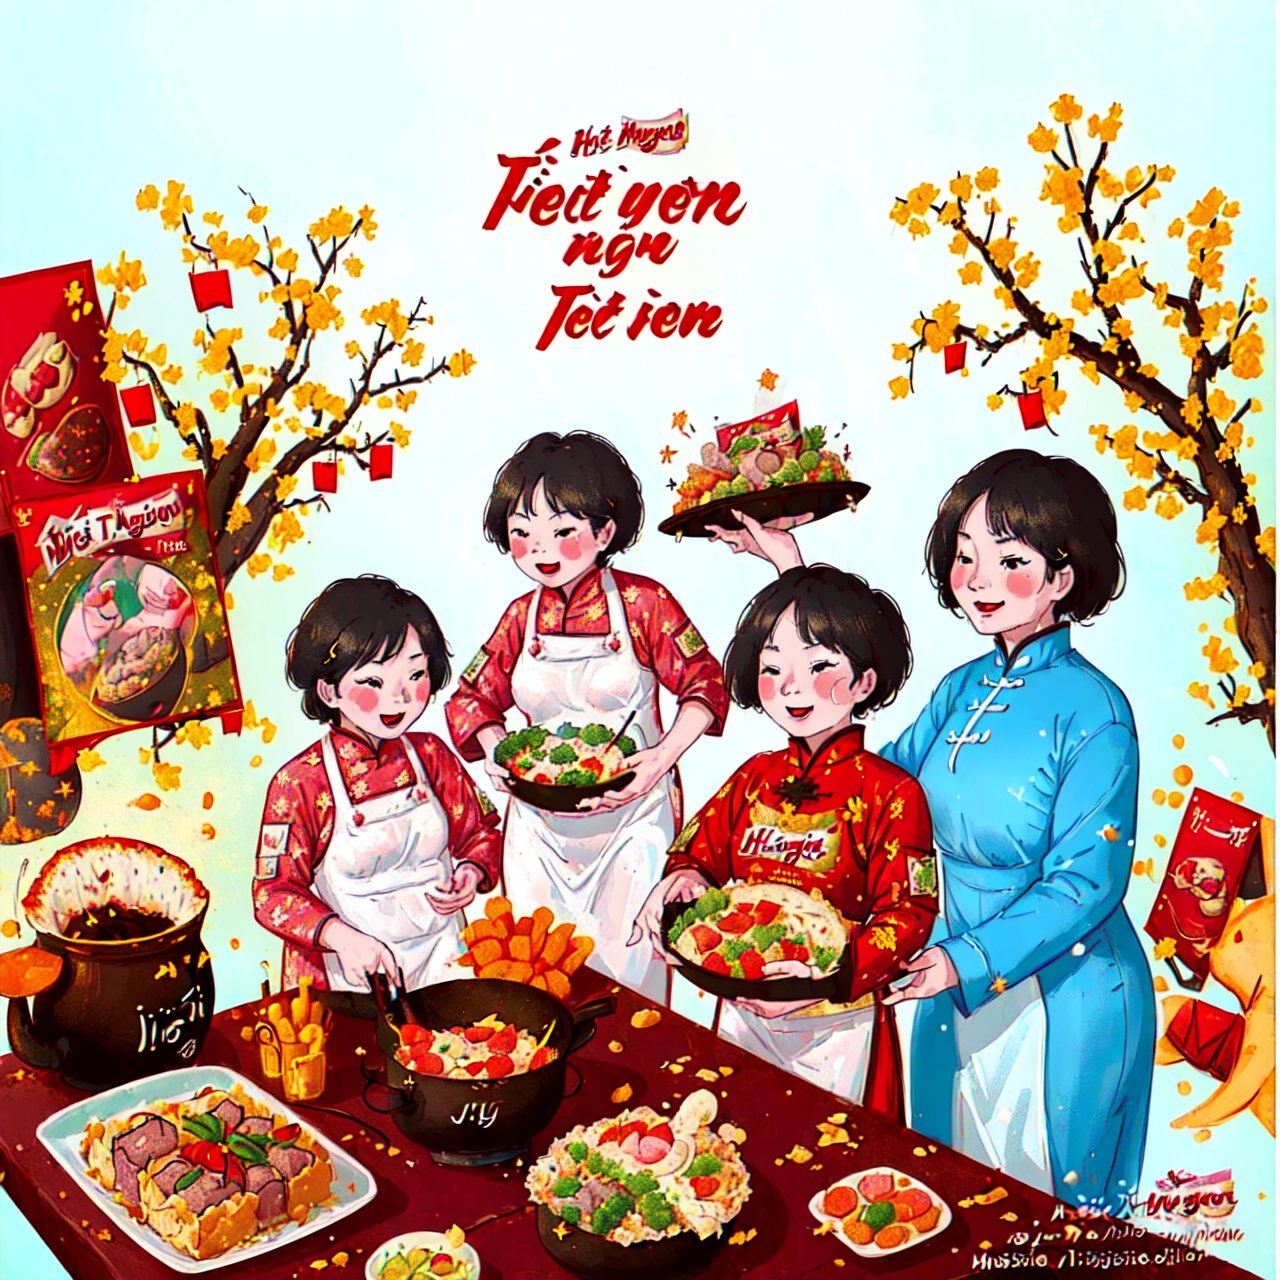 (best quality, masterpiece, high_resolution:1.5), Tet Viet, a Vietnamese family is preparing for the first meal of new year with Chung cake and many delicious foods, happy, best illustration,  in style of Vietnamese comic